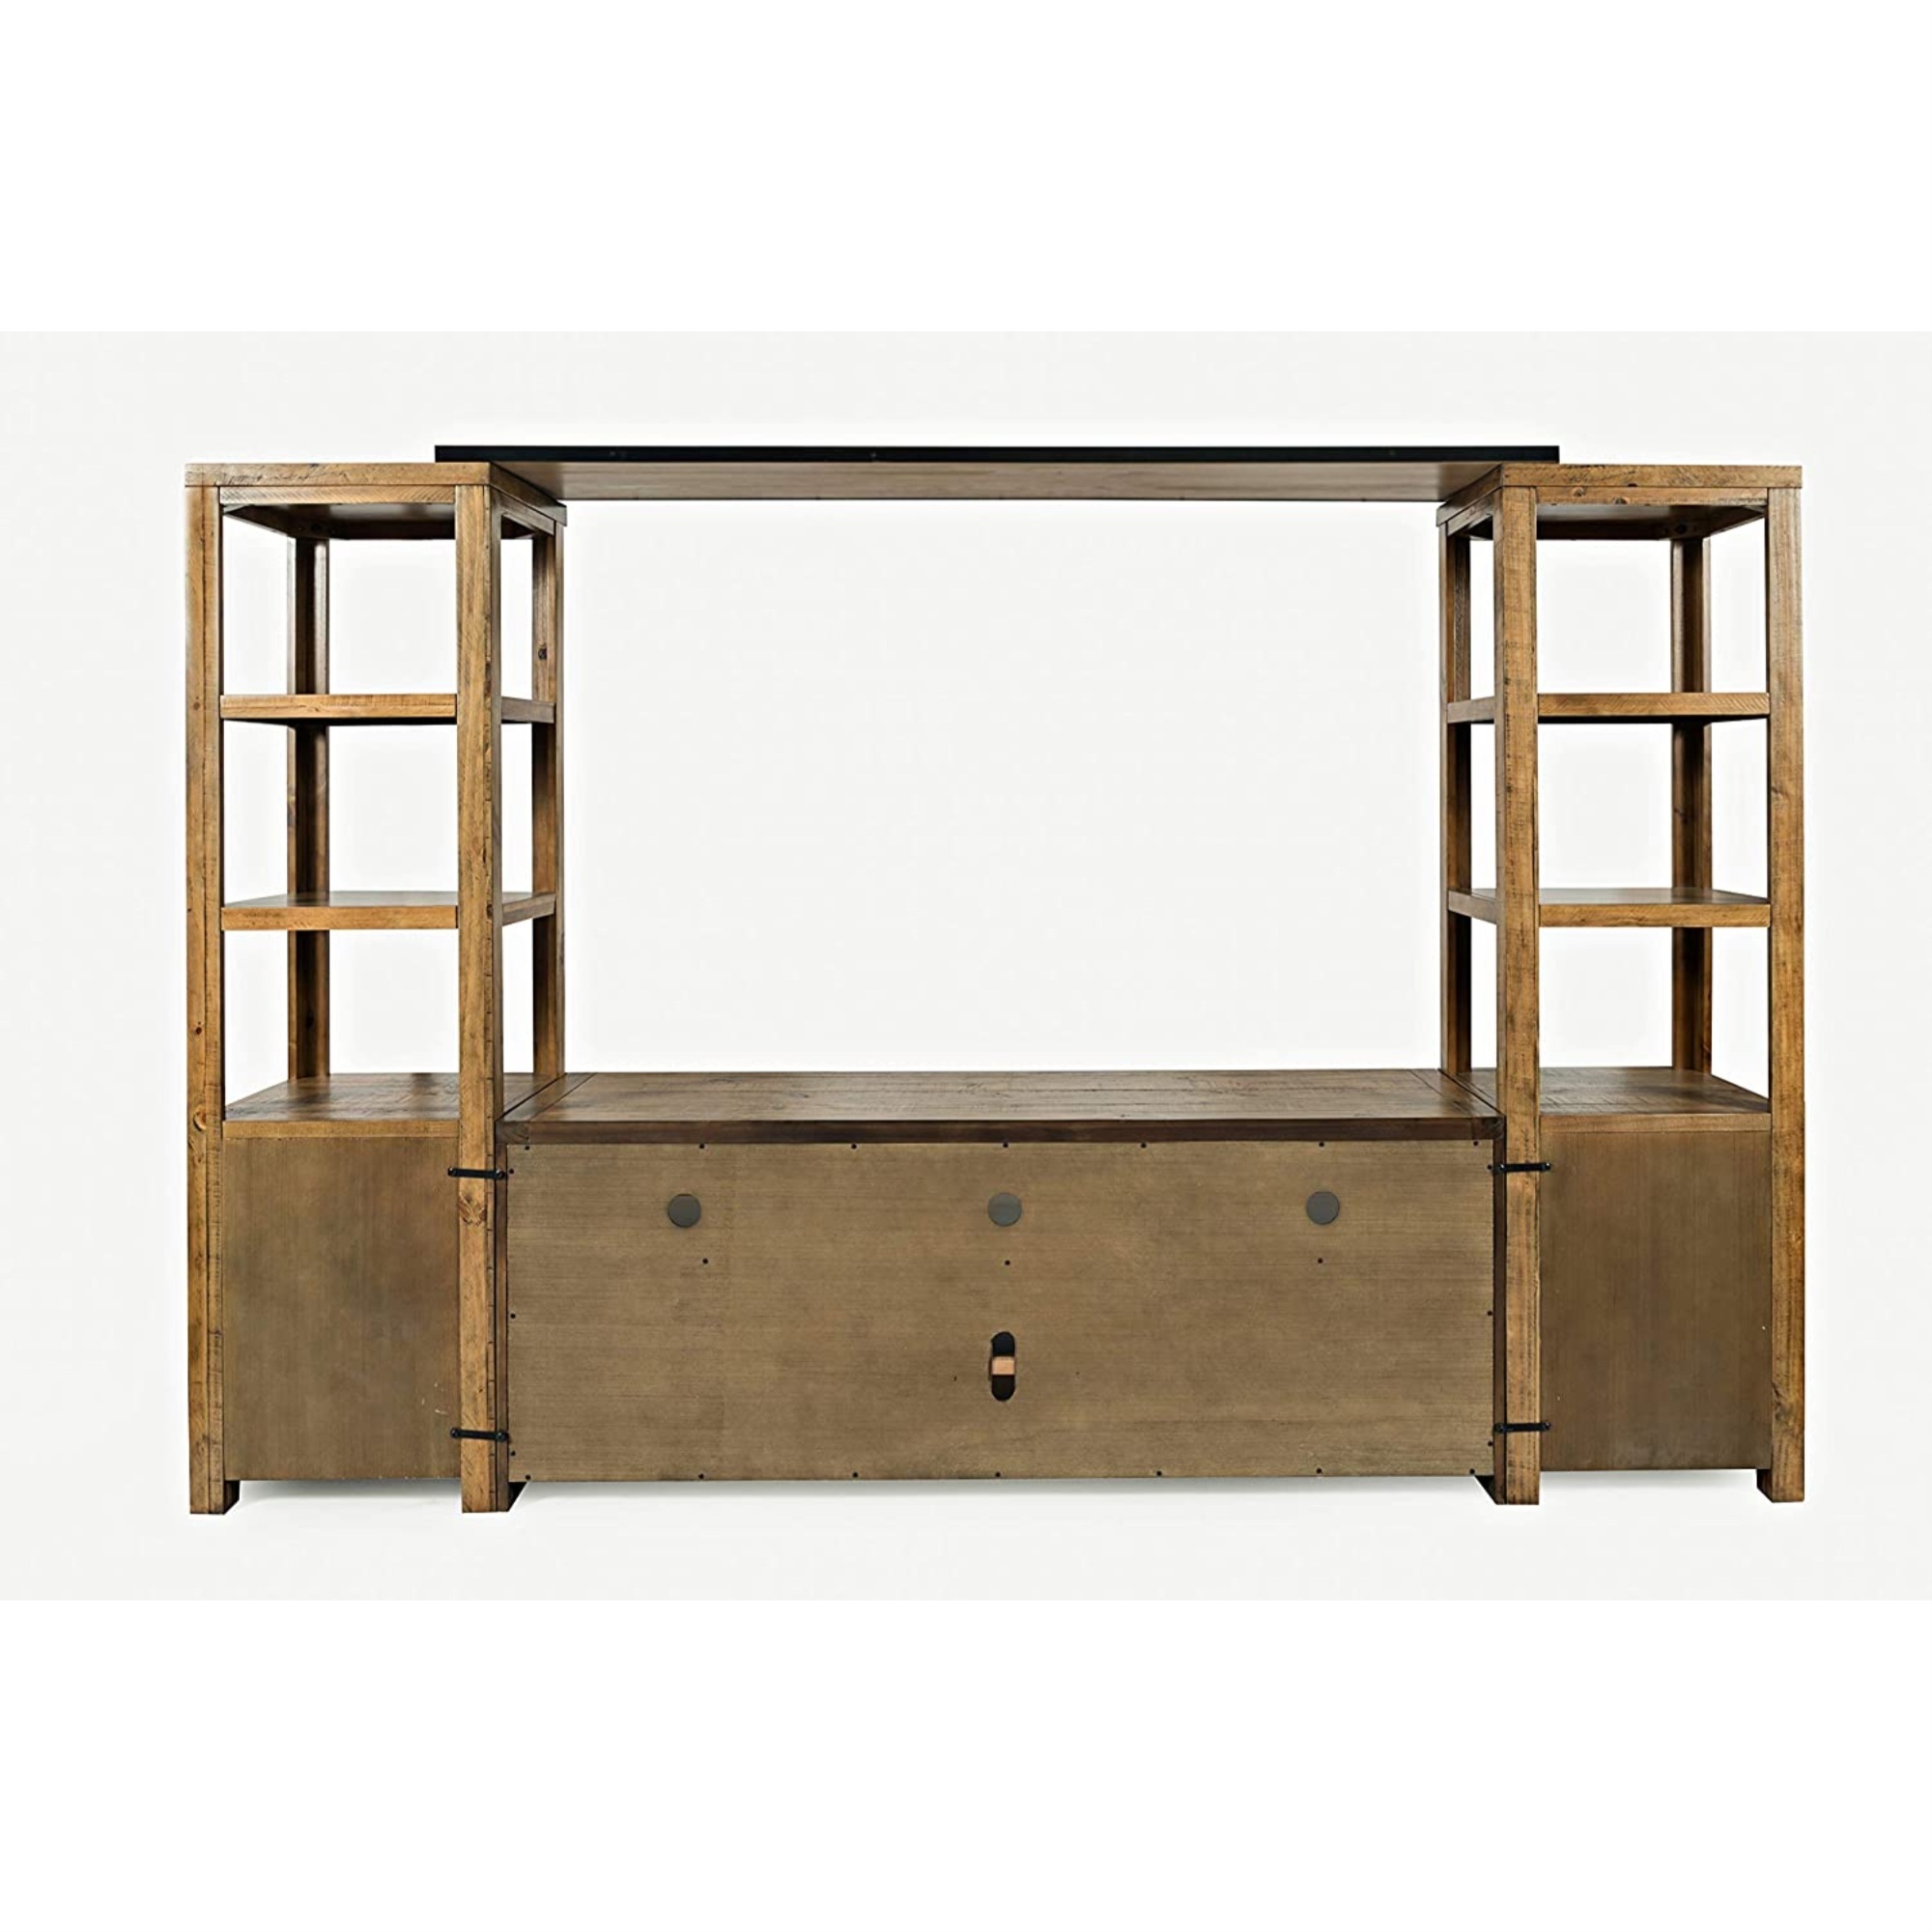 Jofran Telluride Rustic Pine Entertainment Center with 60" TV Console